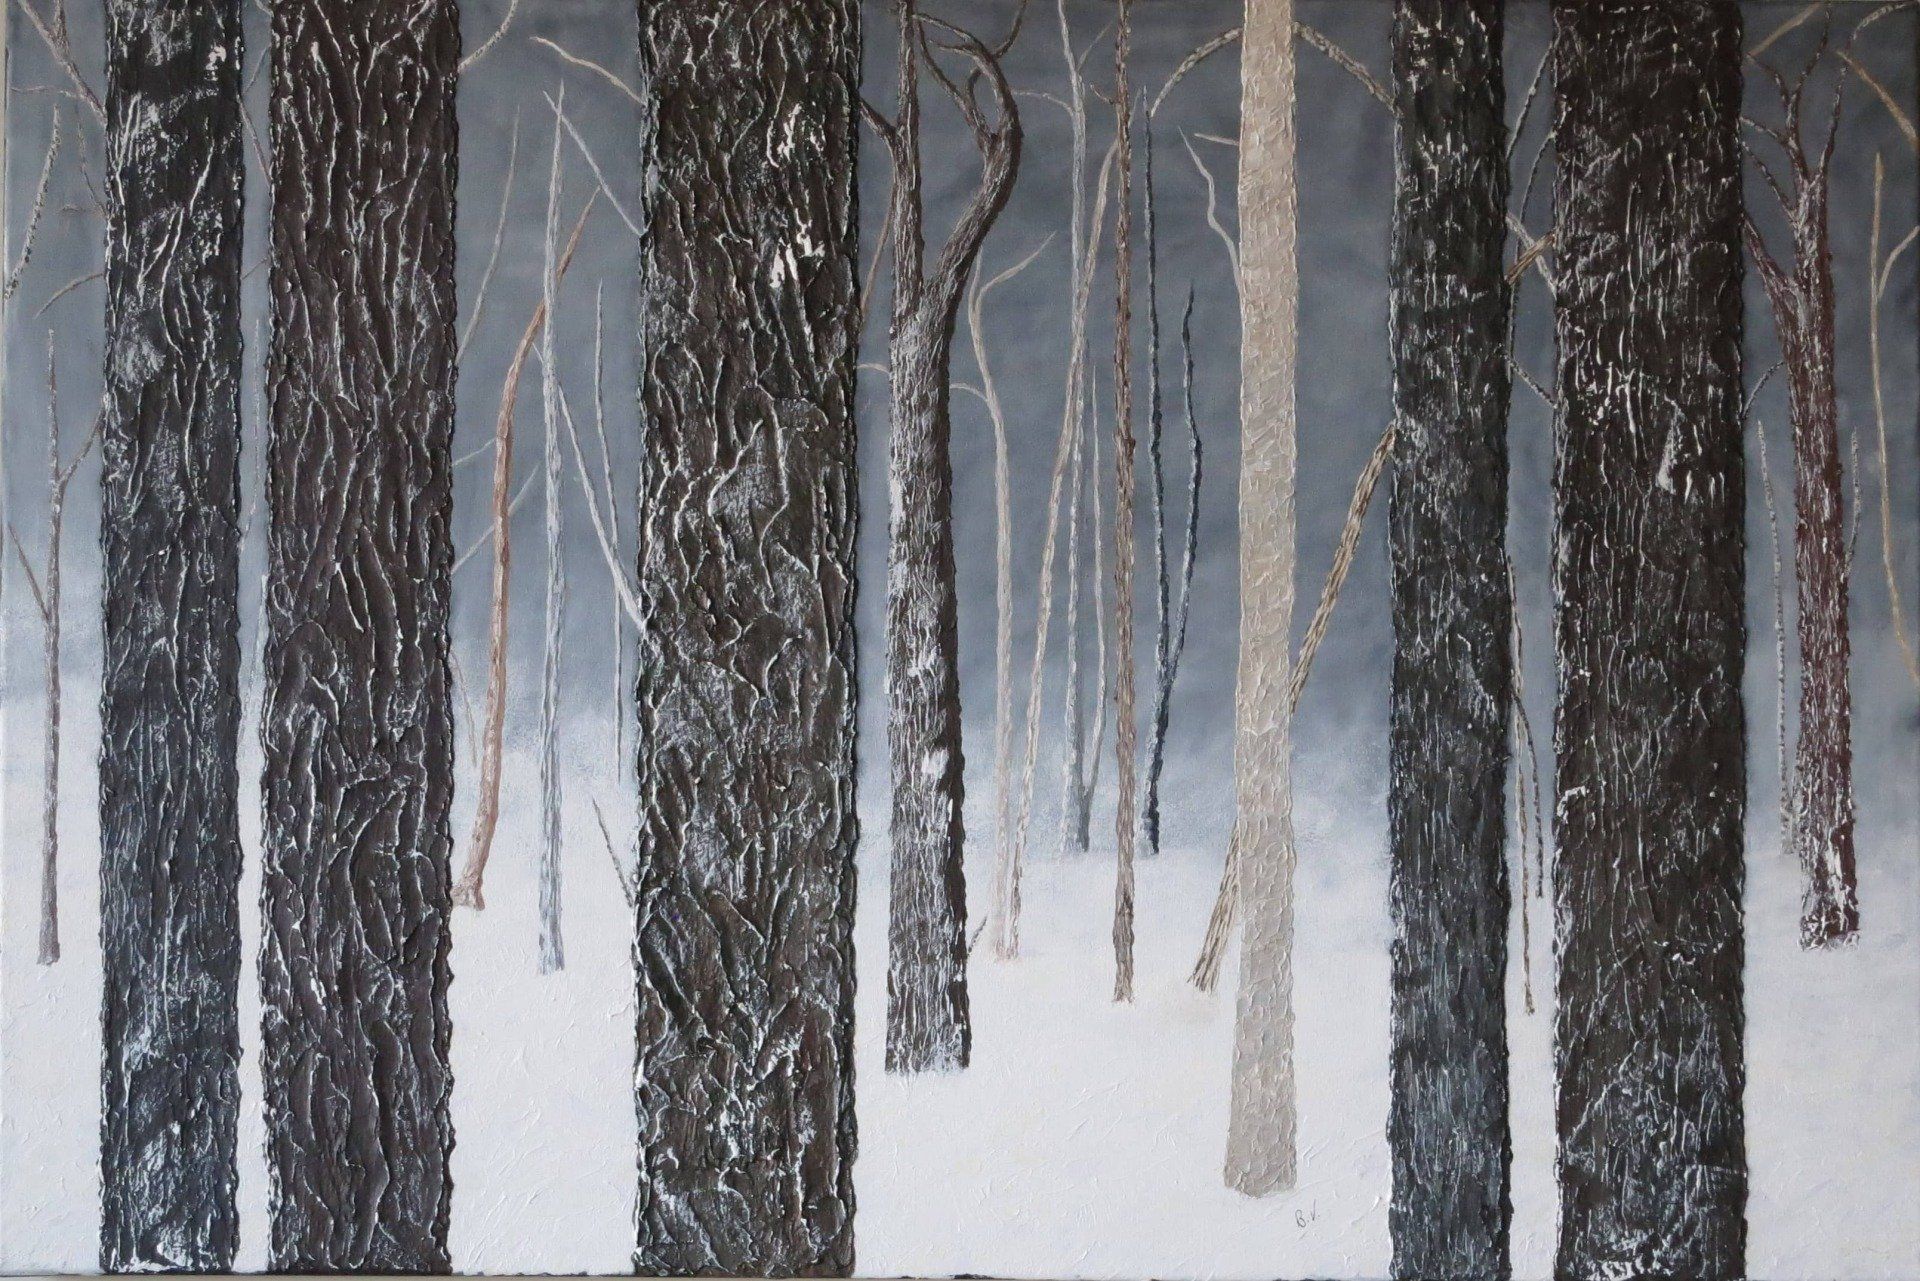 A winter scene 36 in. x 24 in. (Acrylic on Canvas) with five tree trunks in the foreground and a forest bed of white. Trees all around in the mid-ground and the background with a muted sky of white wash over a black gesso base. Even though it is winter the forest scene is peaceful, moody, and quiet. This was the first collection I did in 2014 and in 2016 it went on exhibit. I did 130 pieces of varying sizes. This one is in a private collection